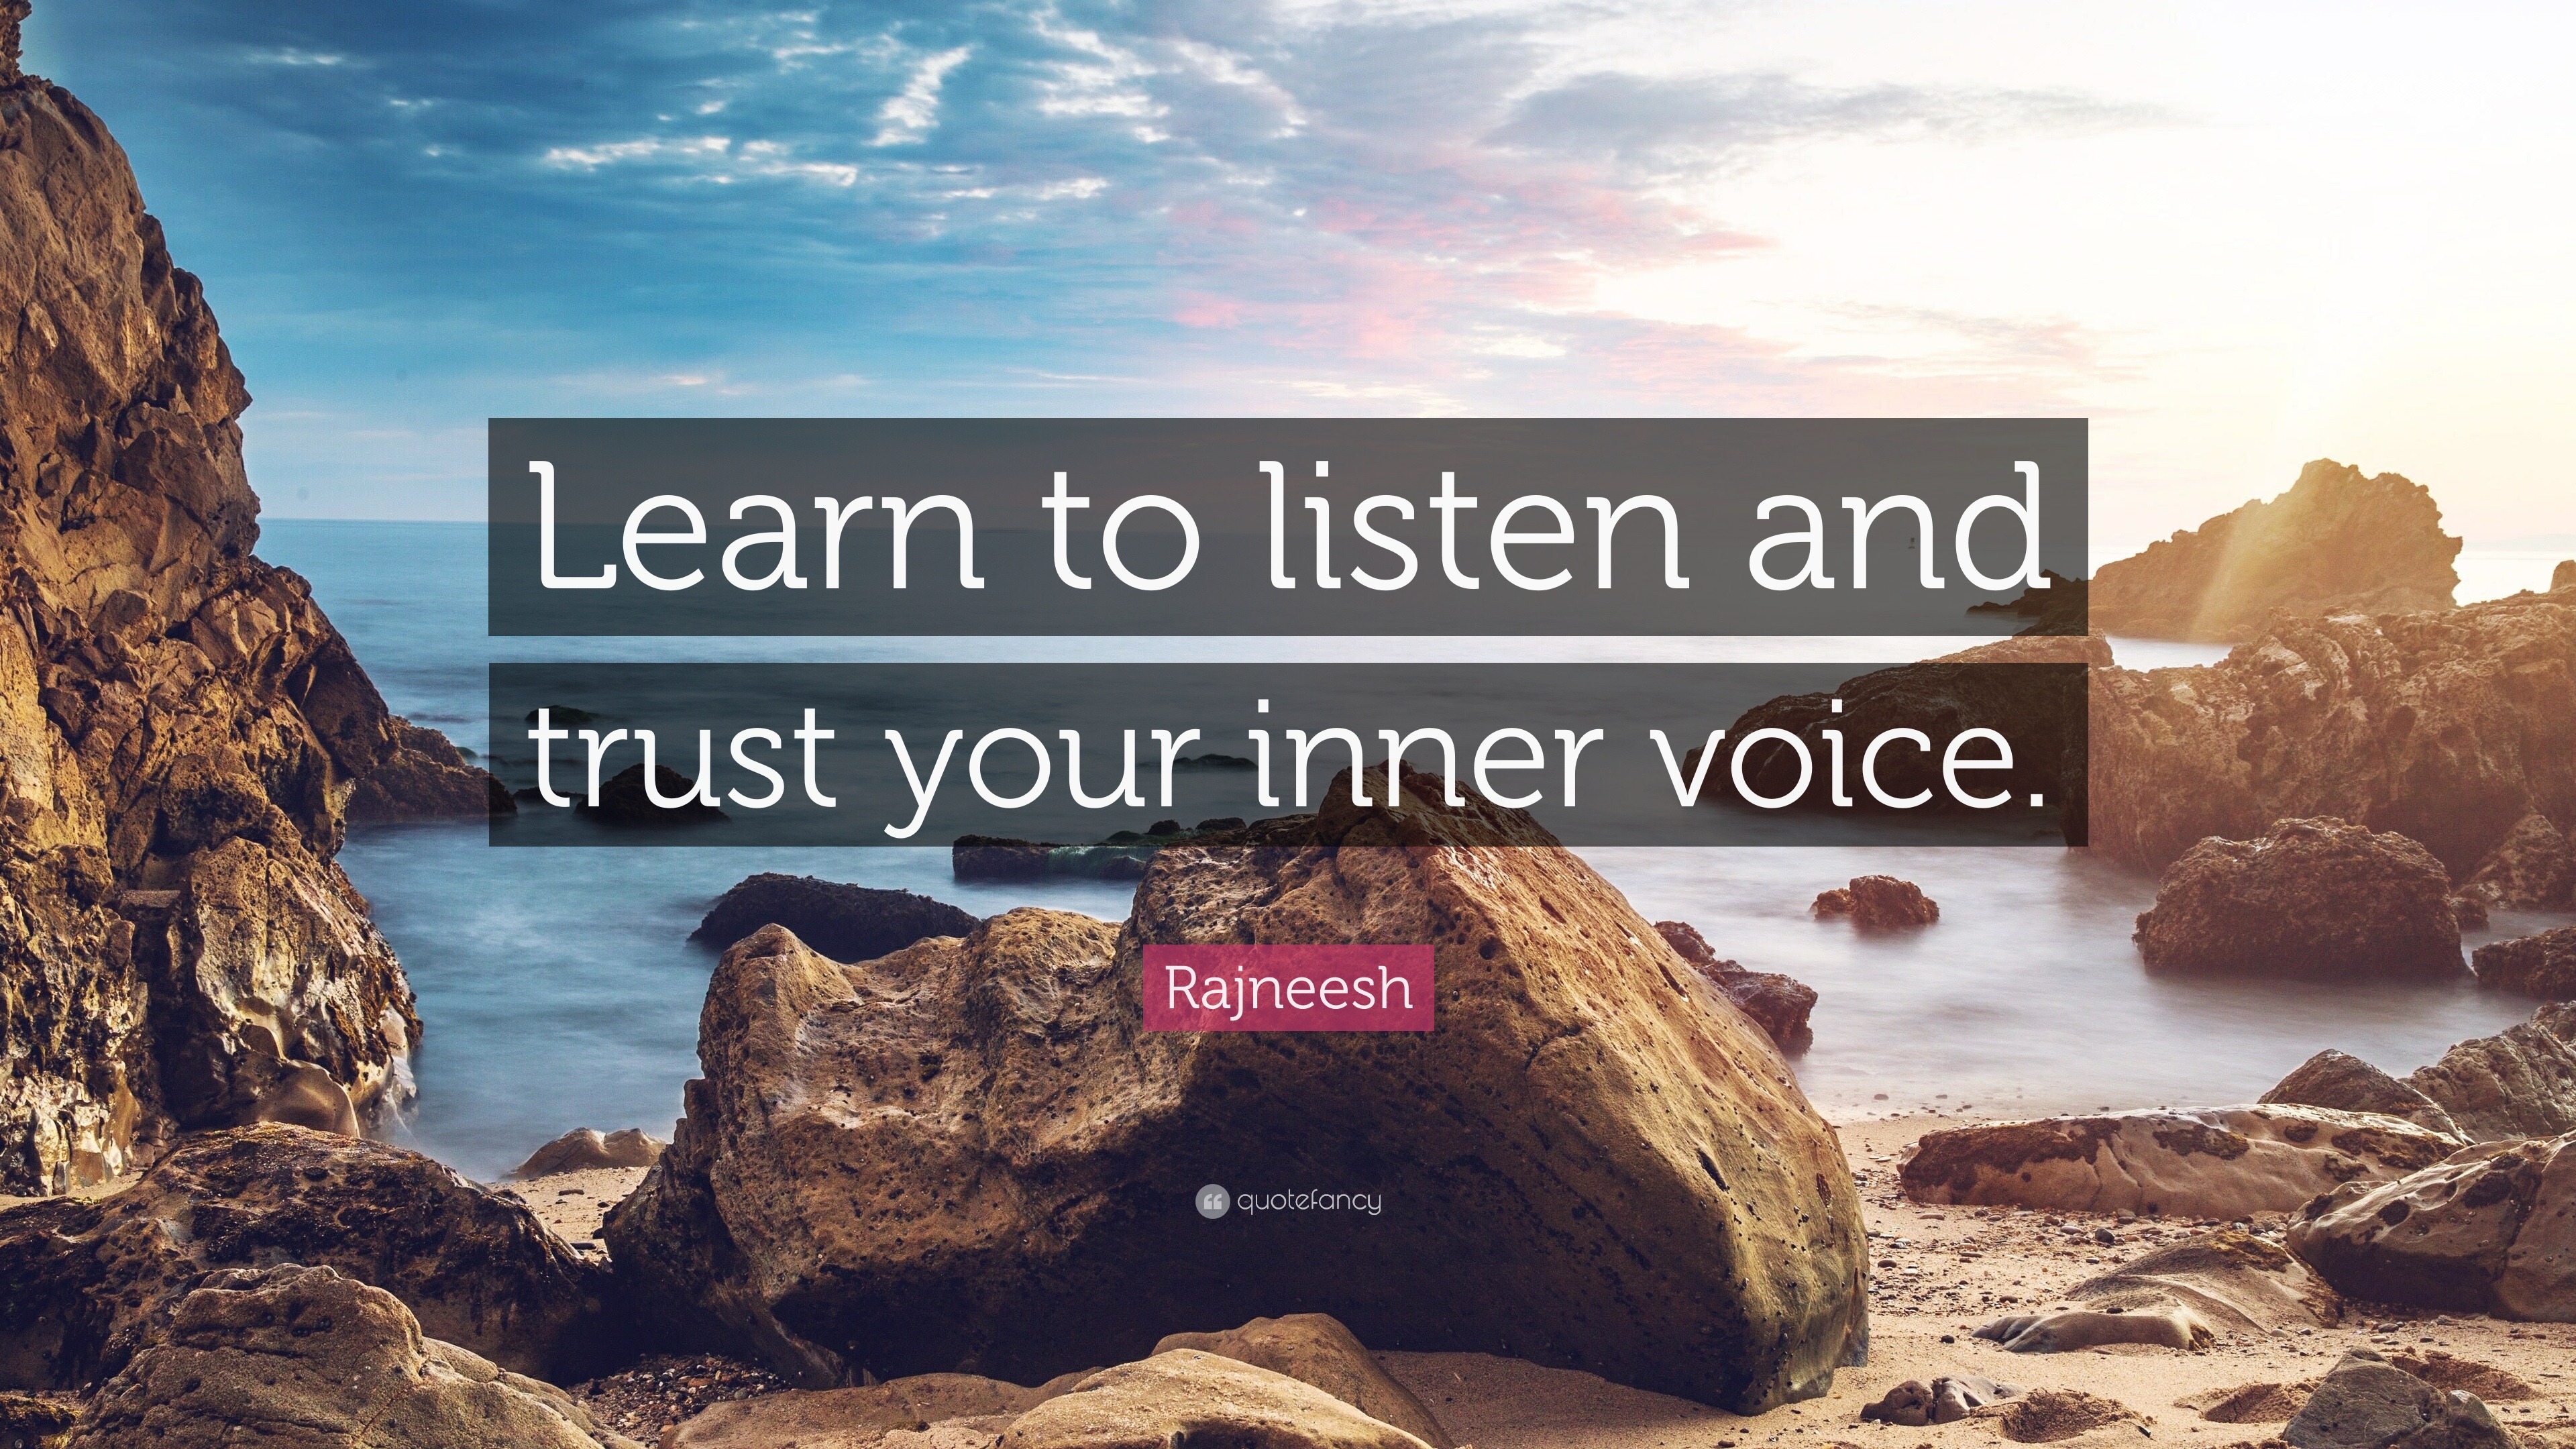 Rajneesh Quote: “Learn to listen and